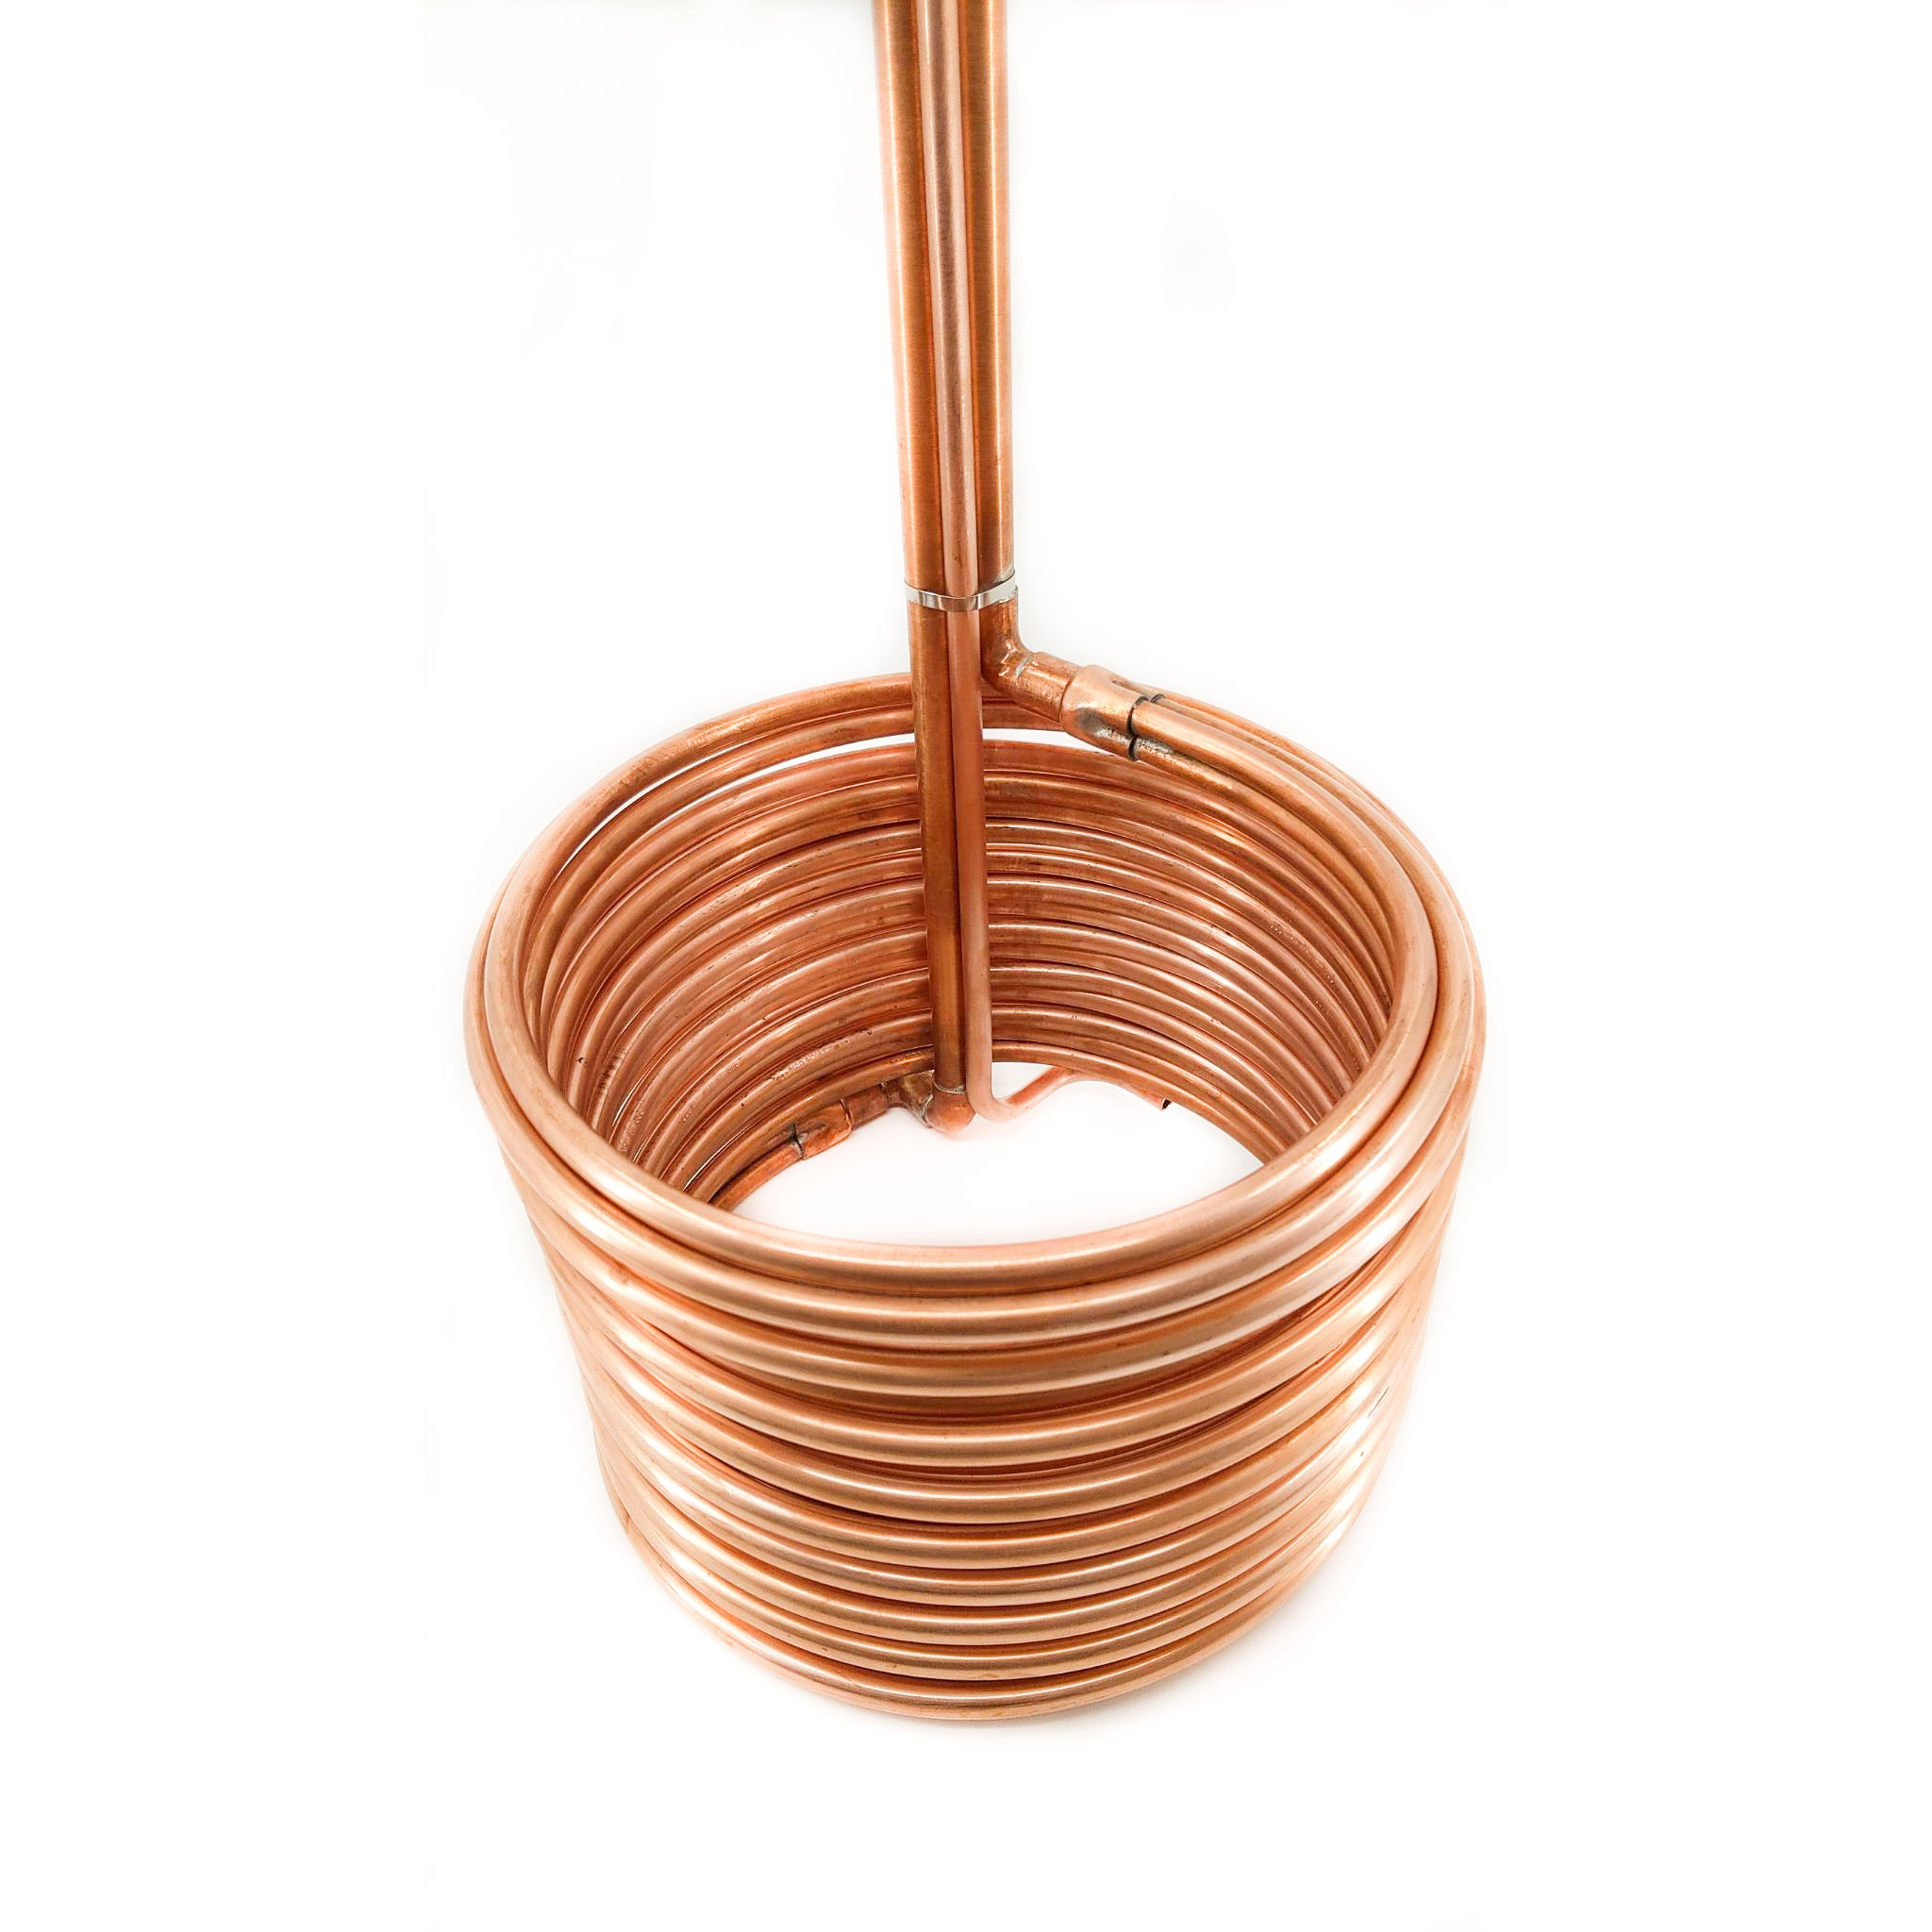 The Mongoose 75' Immersion Wort Chiller